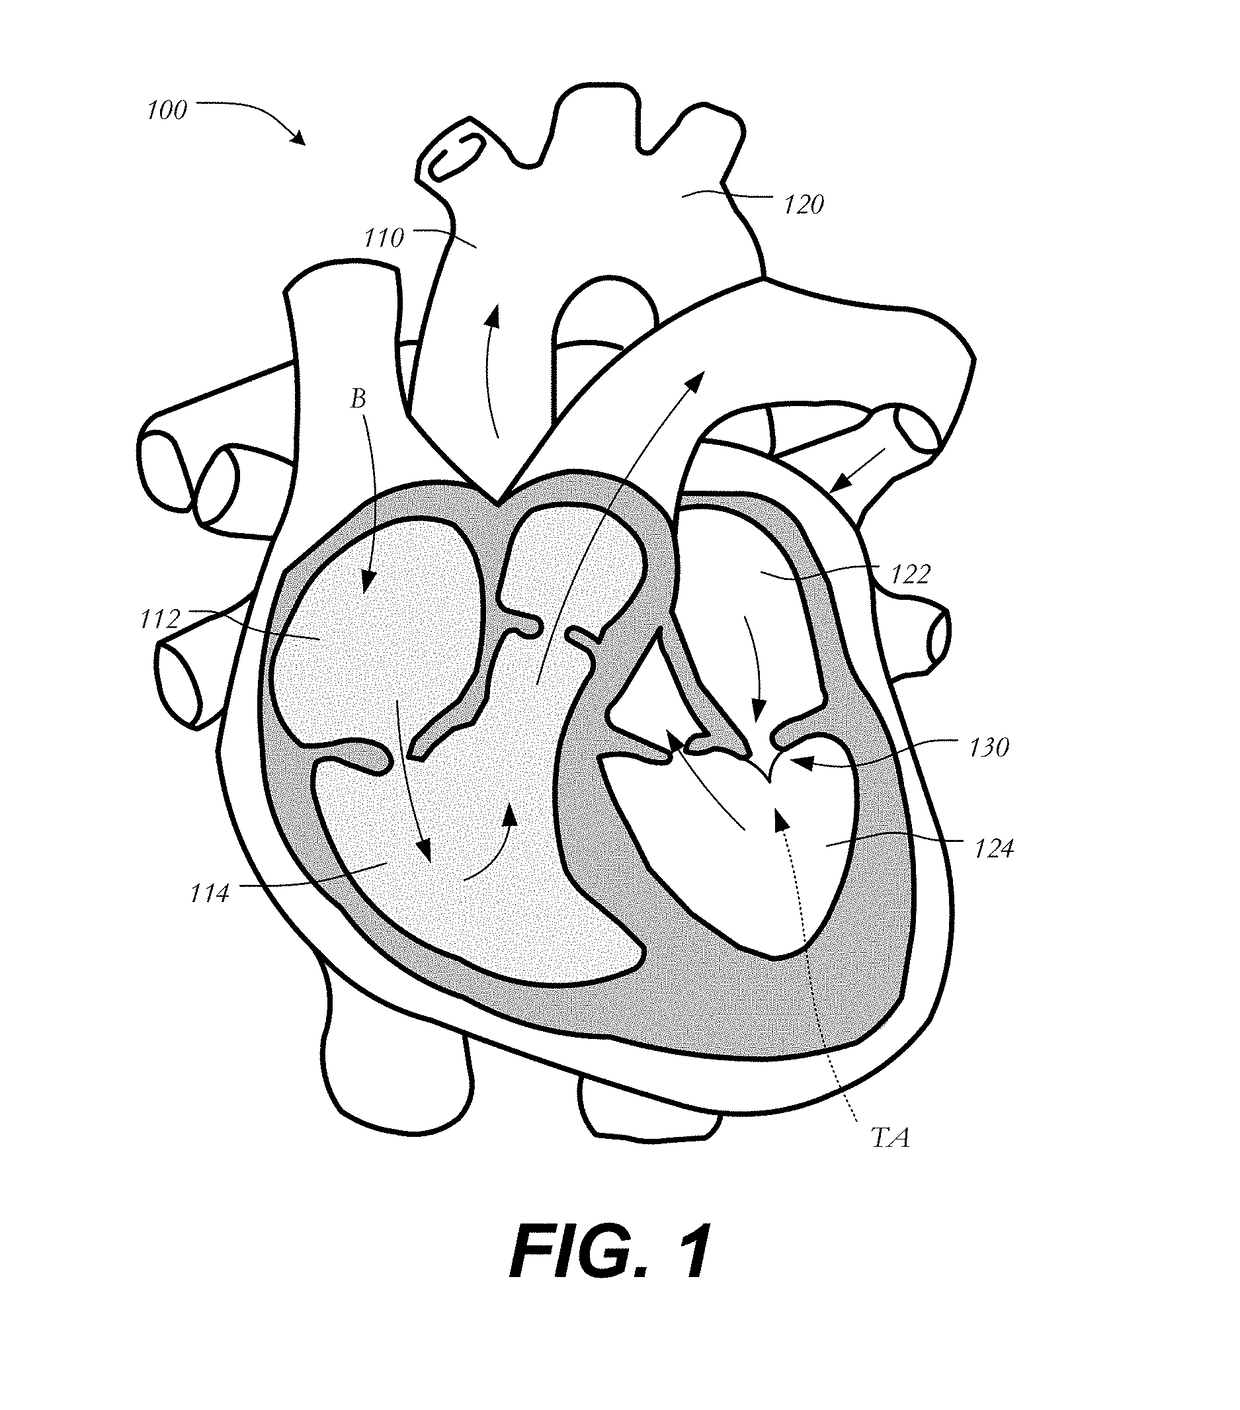 Transapical mitral valve replacement